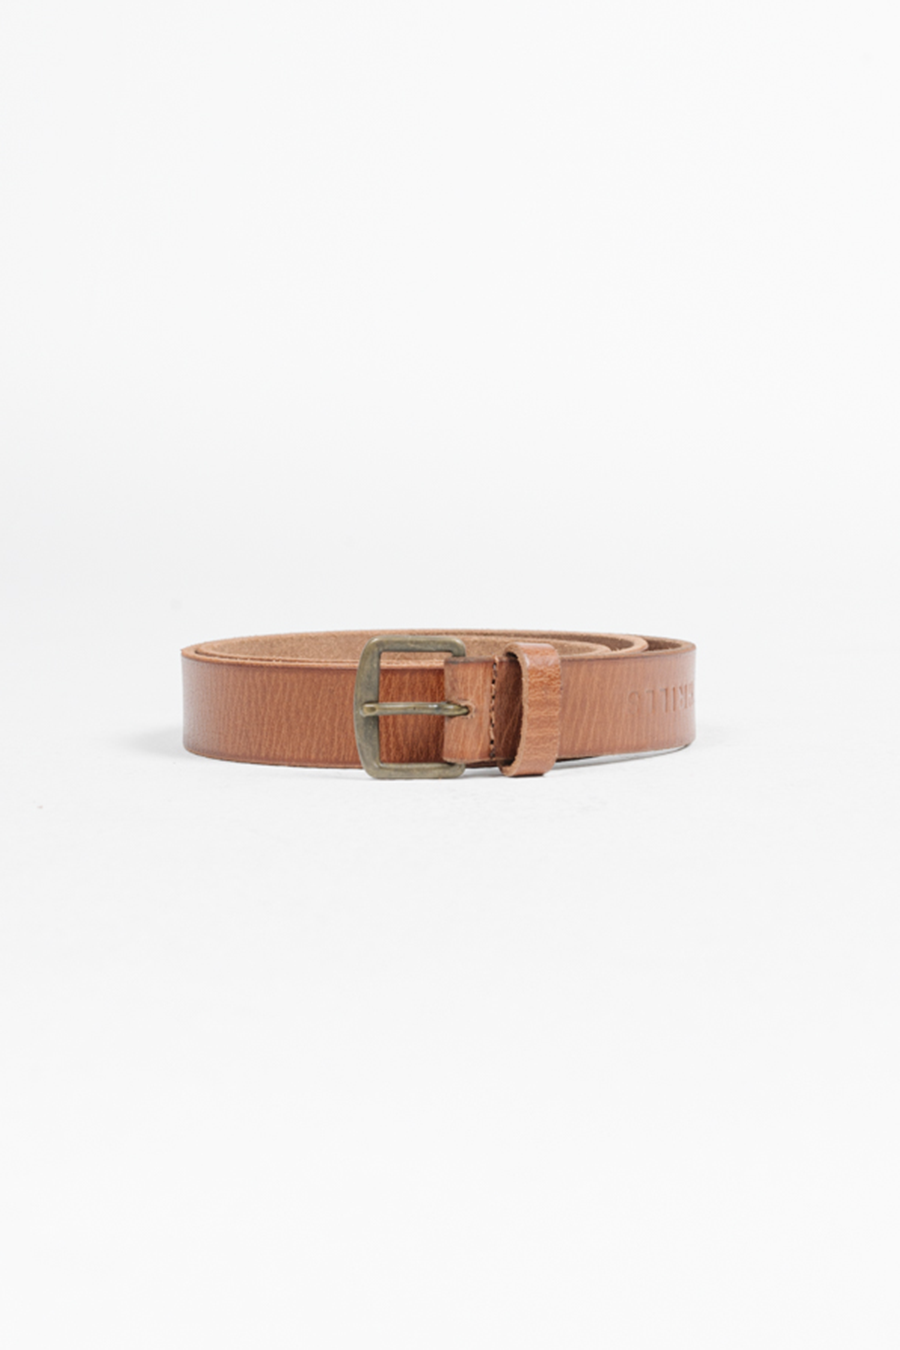 Leather Belt | Tan - Main Image Number 1 of 2